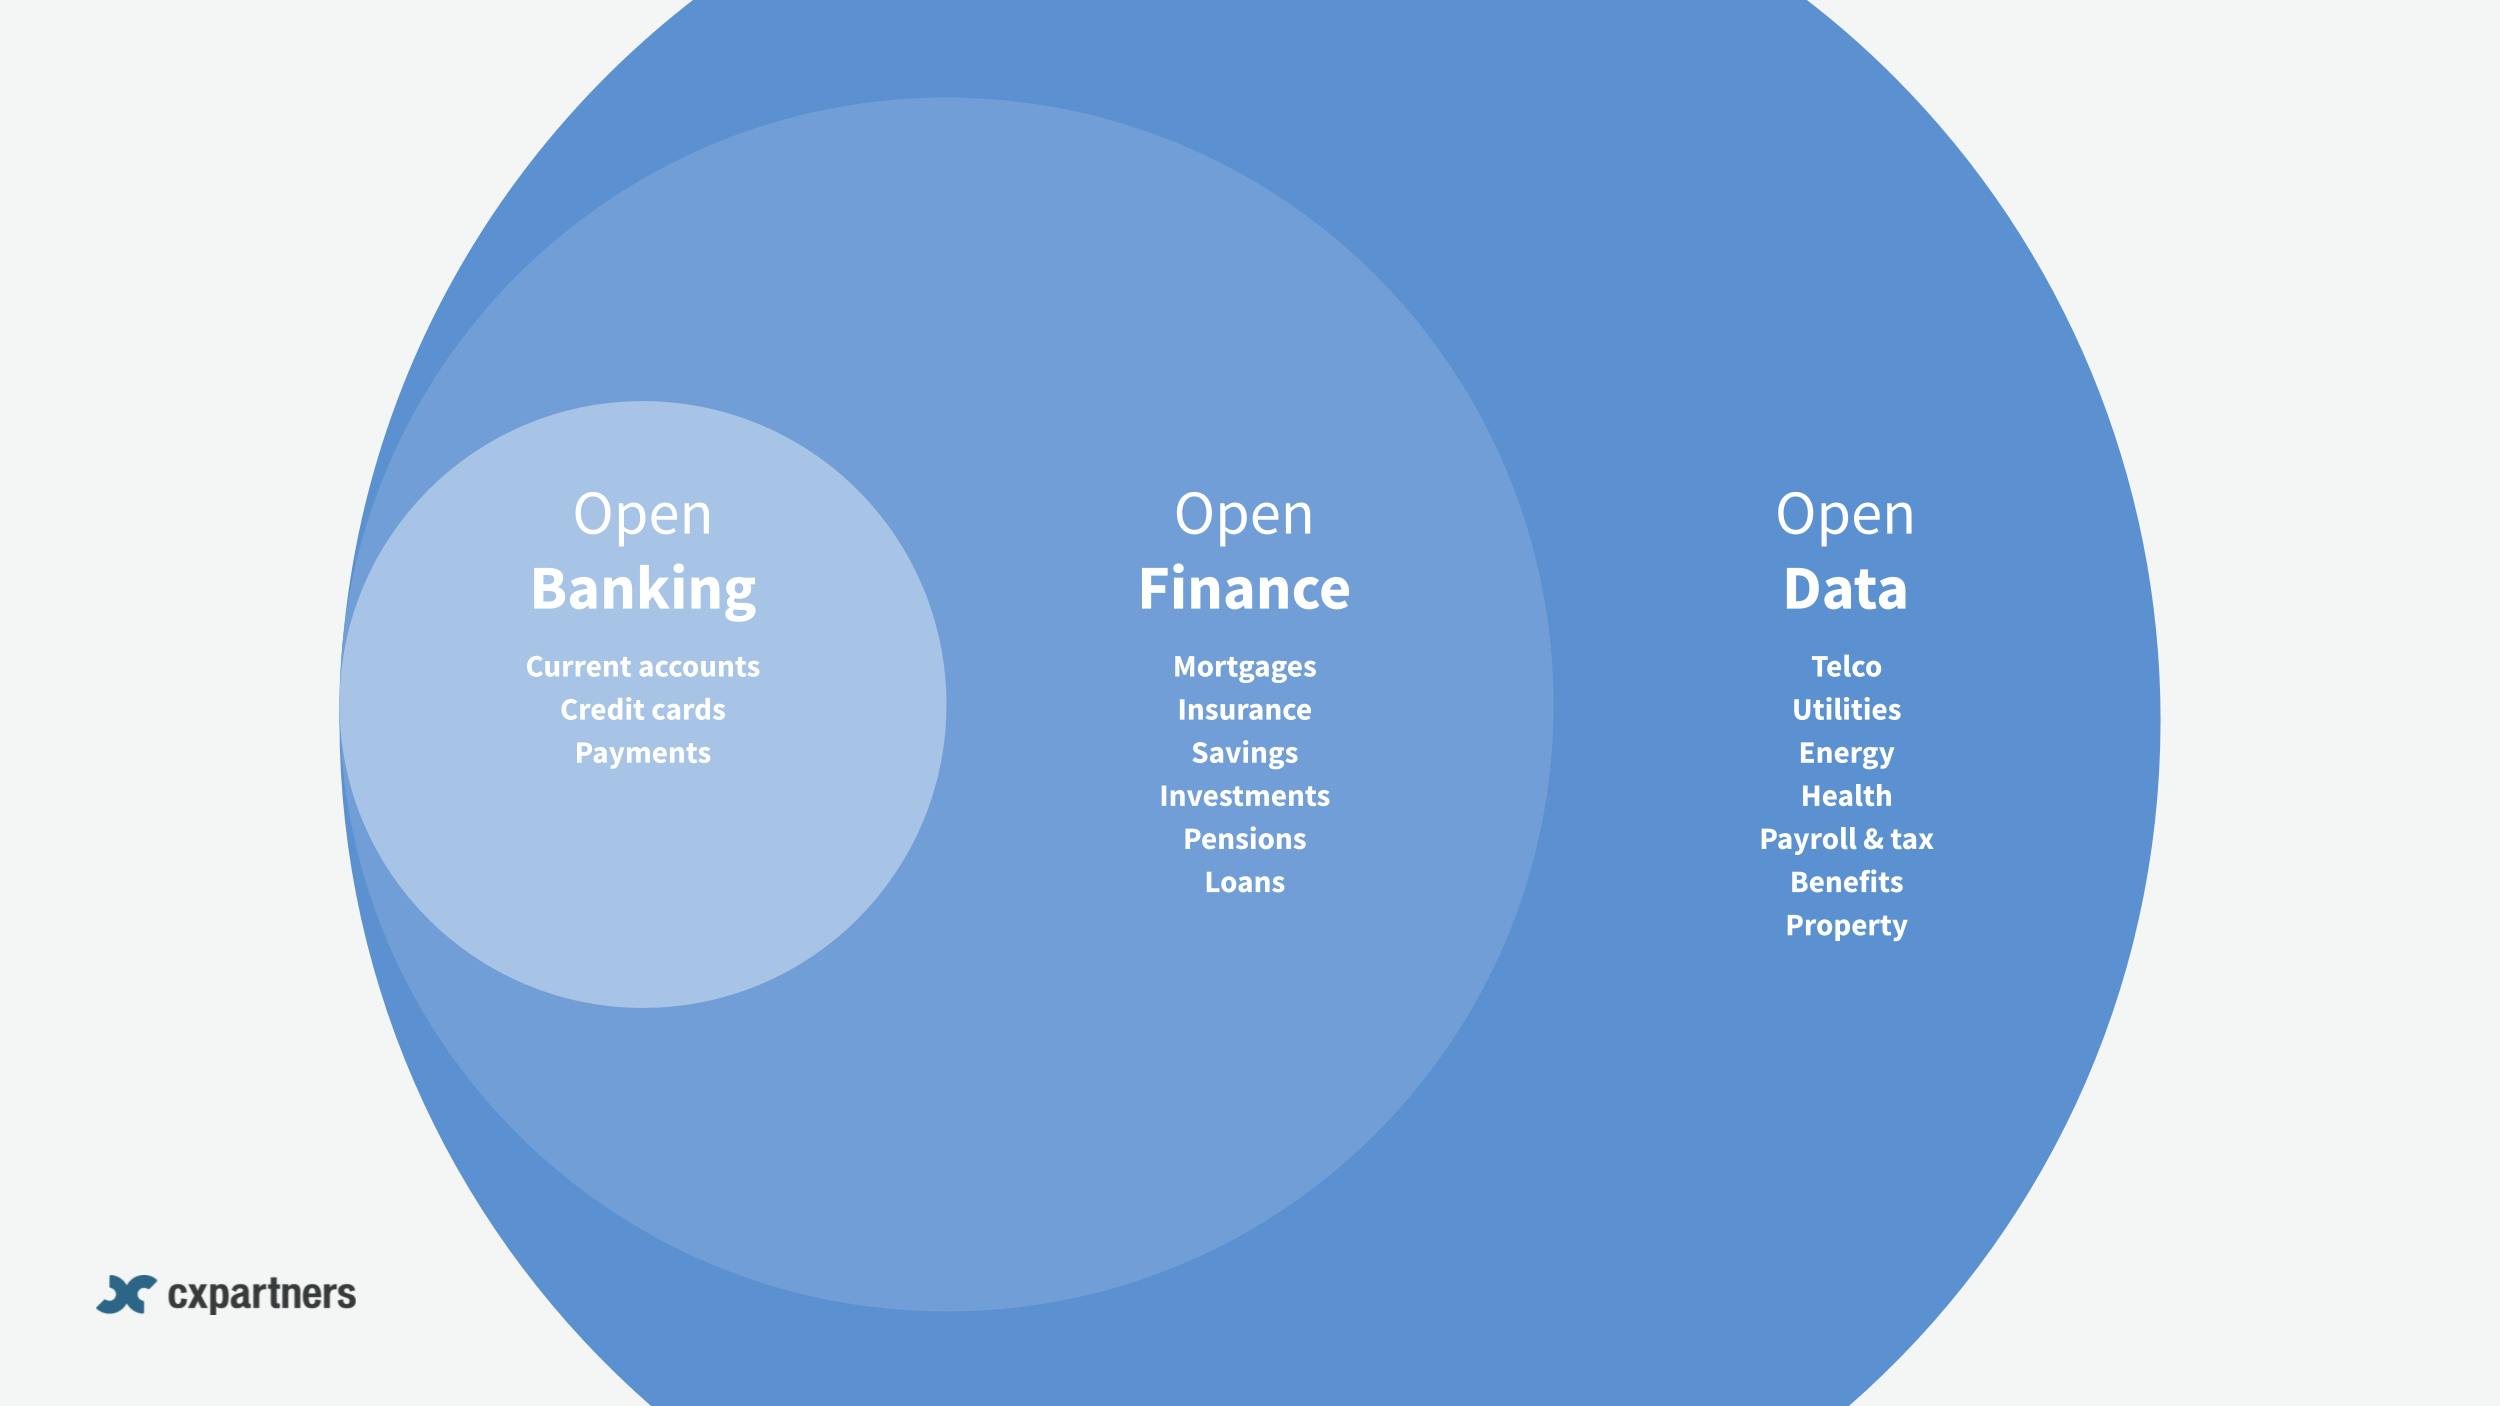 Three circles showing the connection between Open Banking, Open Finance and Open Data. The inner circle is ‘Open Banking’ which includes current accounts, credit cards and payments. This sits inside of the middle circle which is ‘Open Finance’ and includes mortgages, insurance, savings, investments, pensions and loans. The outer circle is ‘Open Data’ which includes telco, utilities, energy, health, payroll & tax, benefits and property.